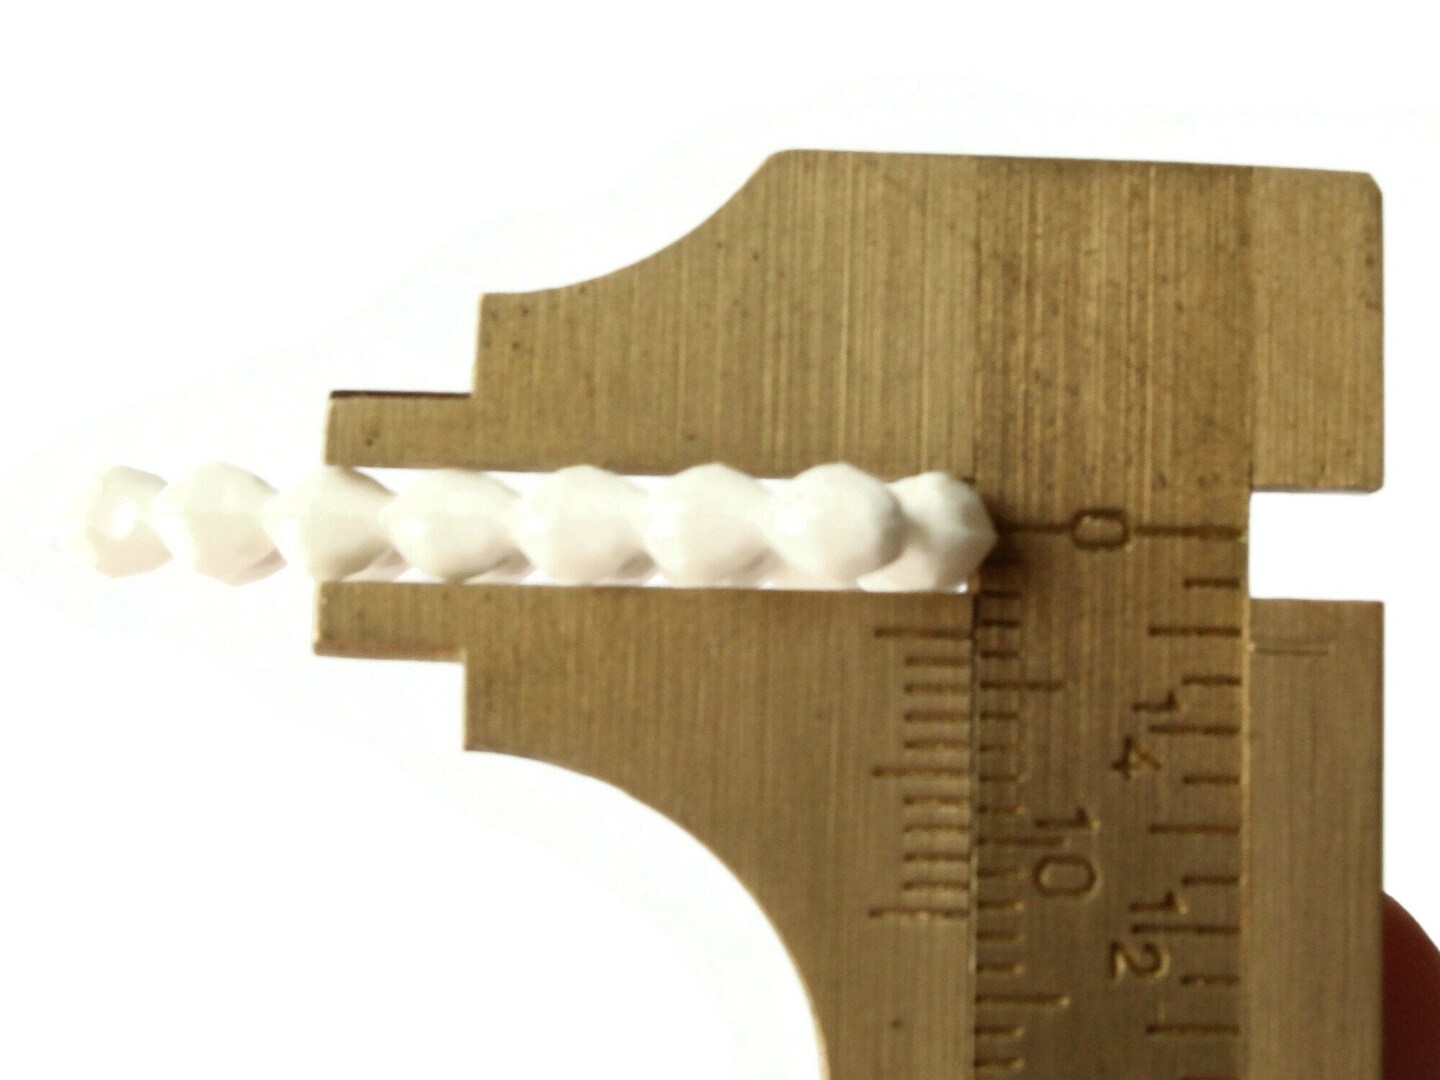 8 31mm White Vintage Plastic Open Bumpy Triangle Beads